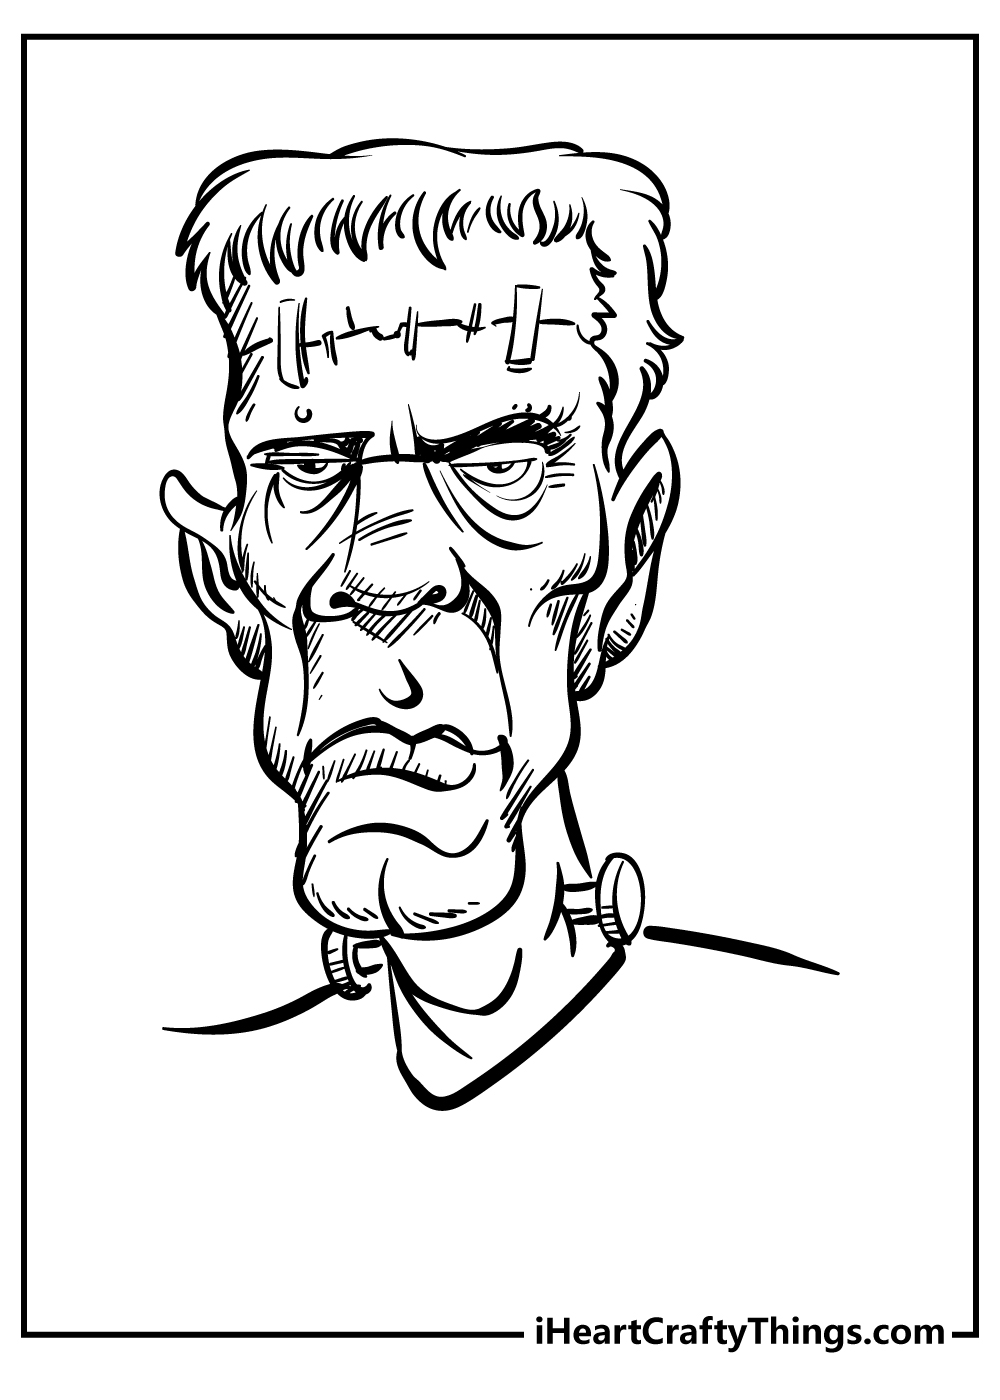 Frankenstein Coloring Pages free pdf download